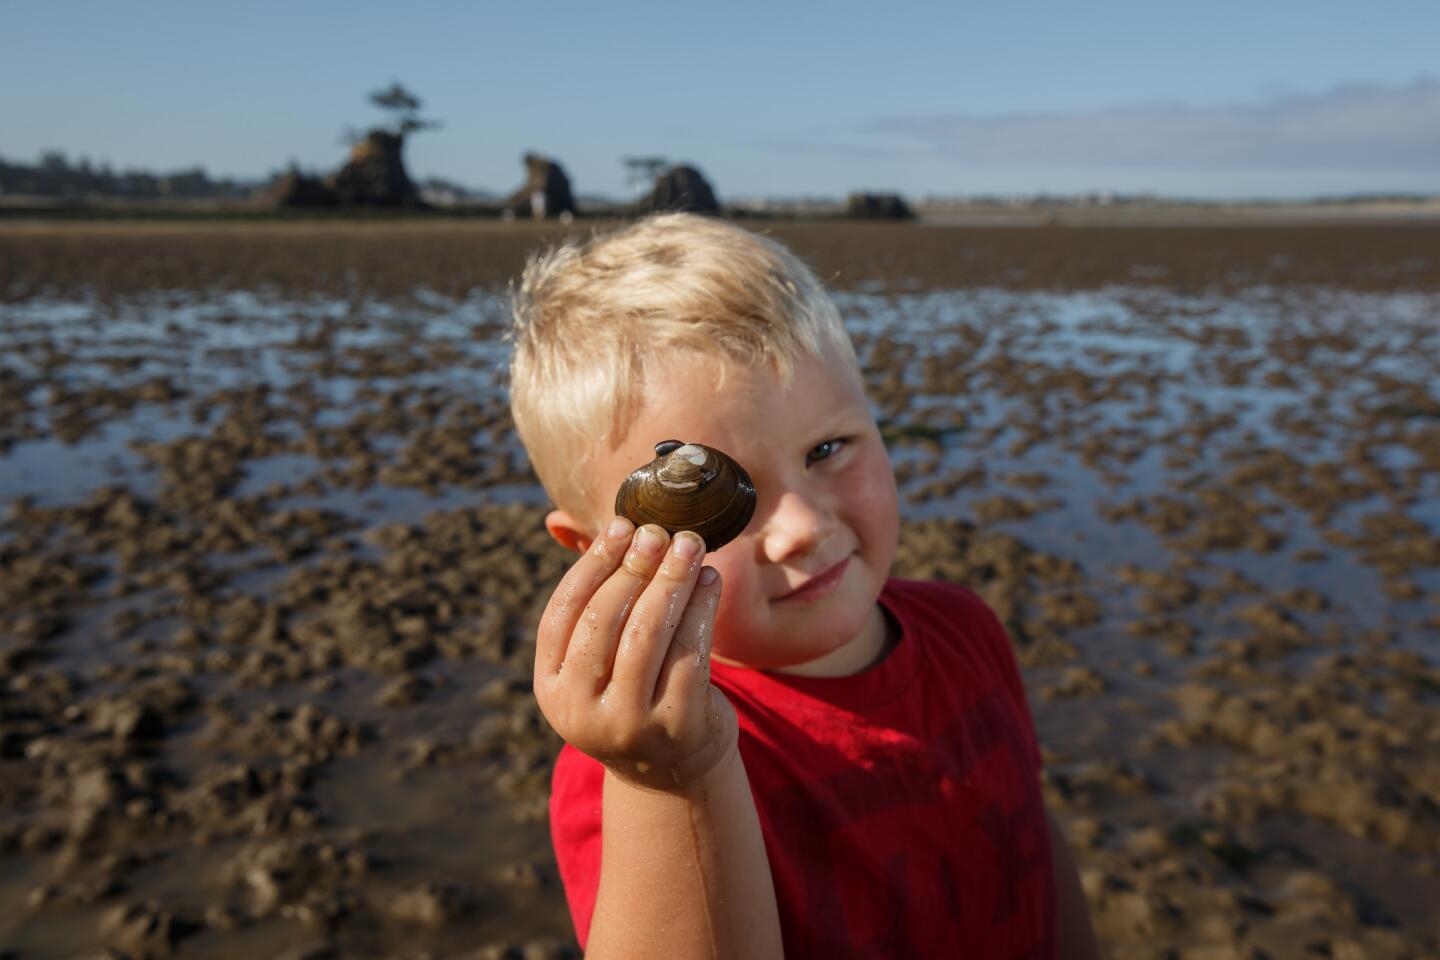 Winslow Ellis, 4, holds a clam he dug up on an adventure with his father at Siletz Bay in Lincoln City, Ore.